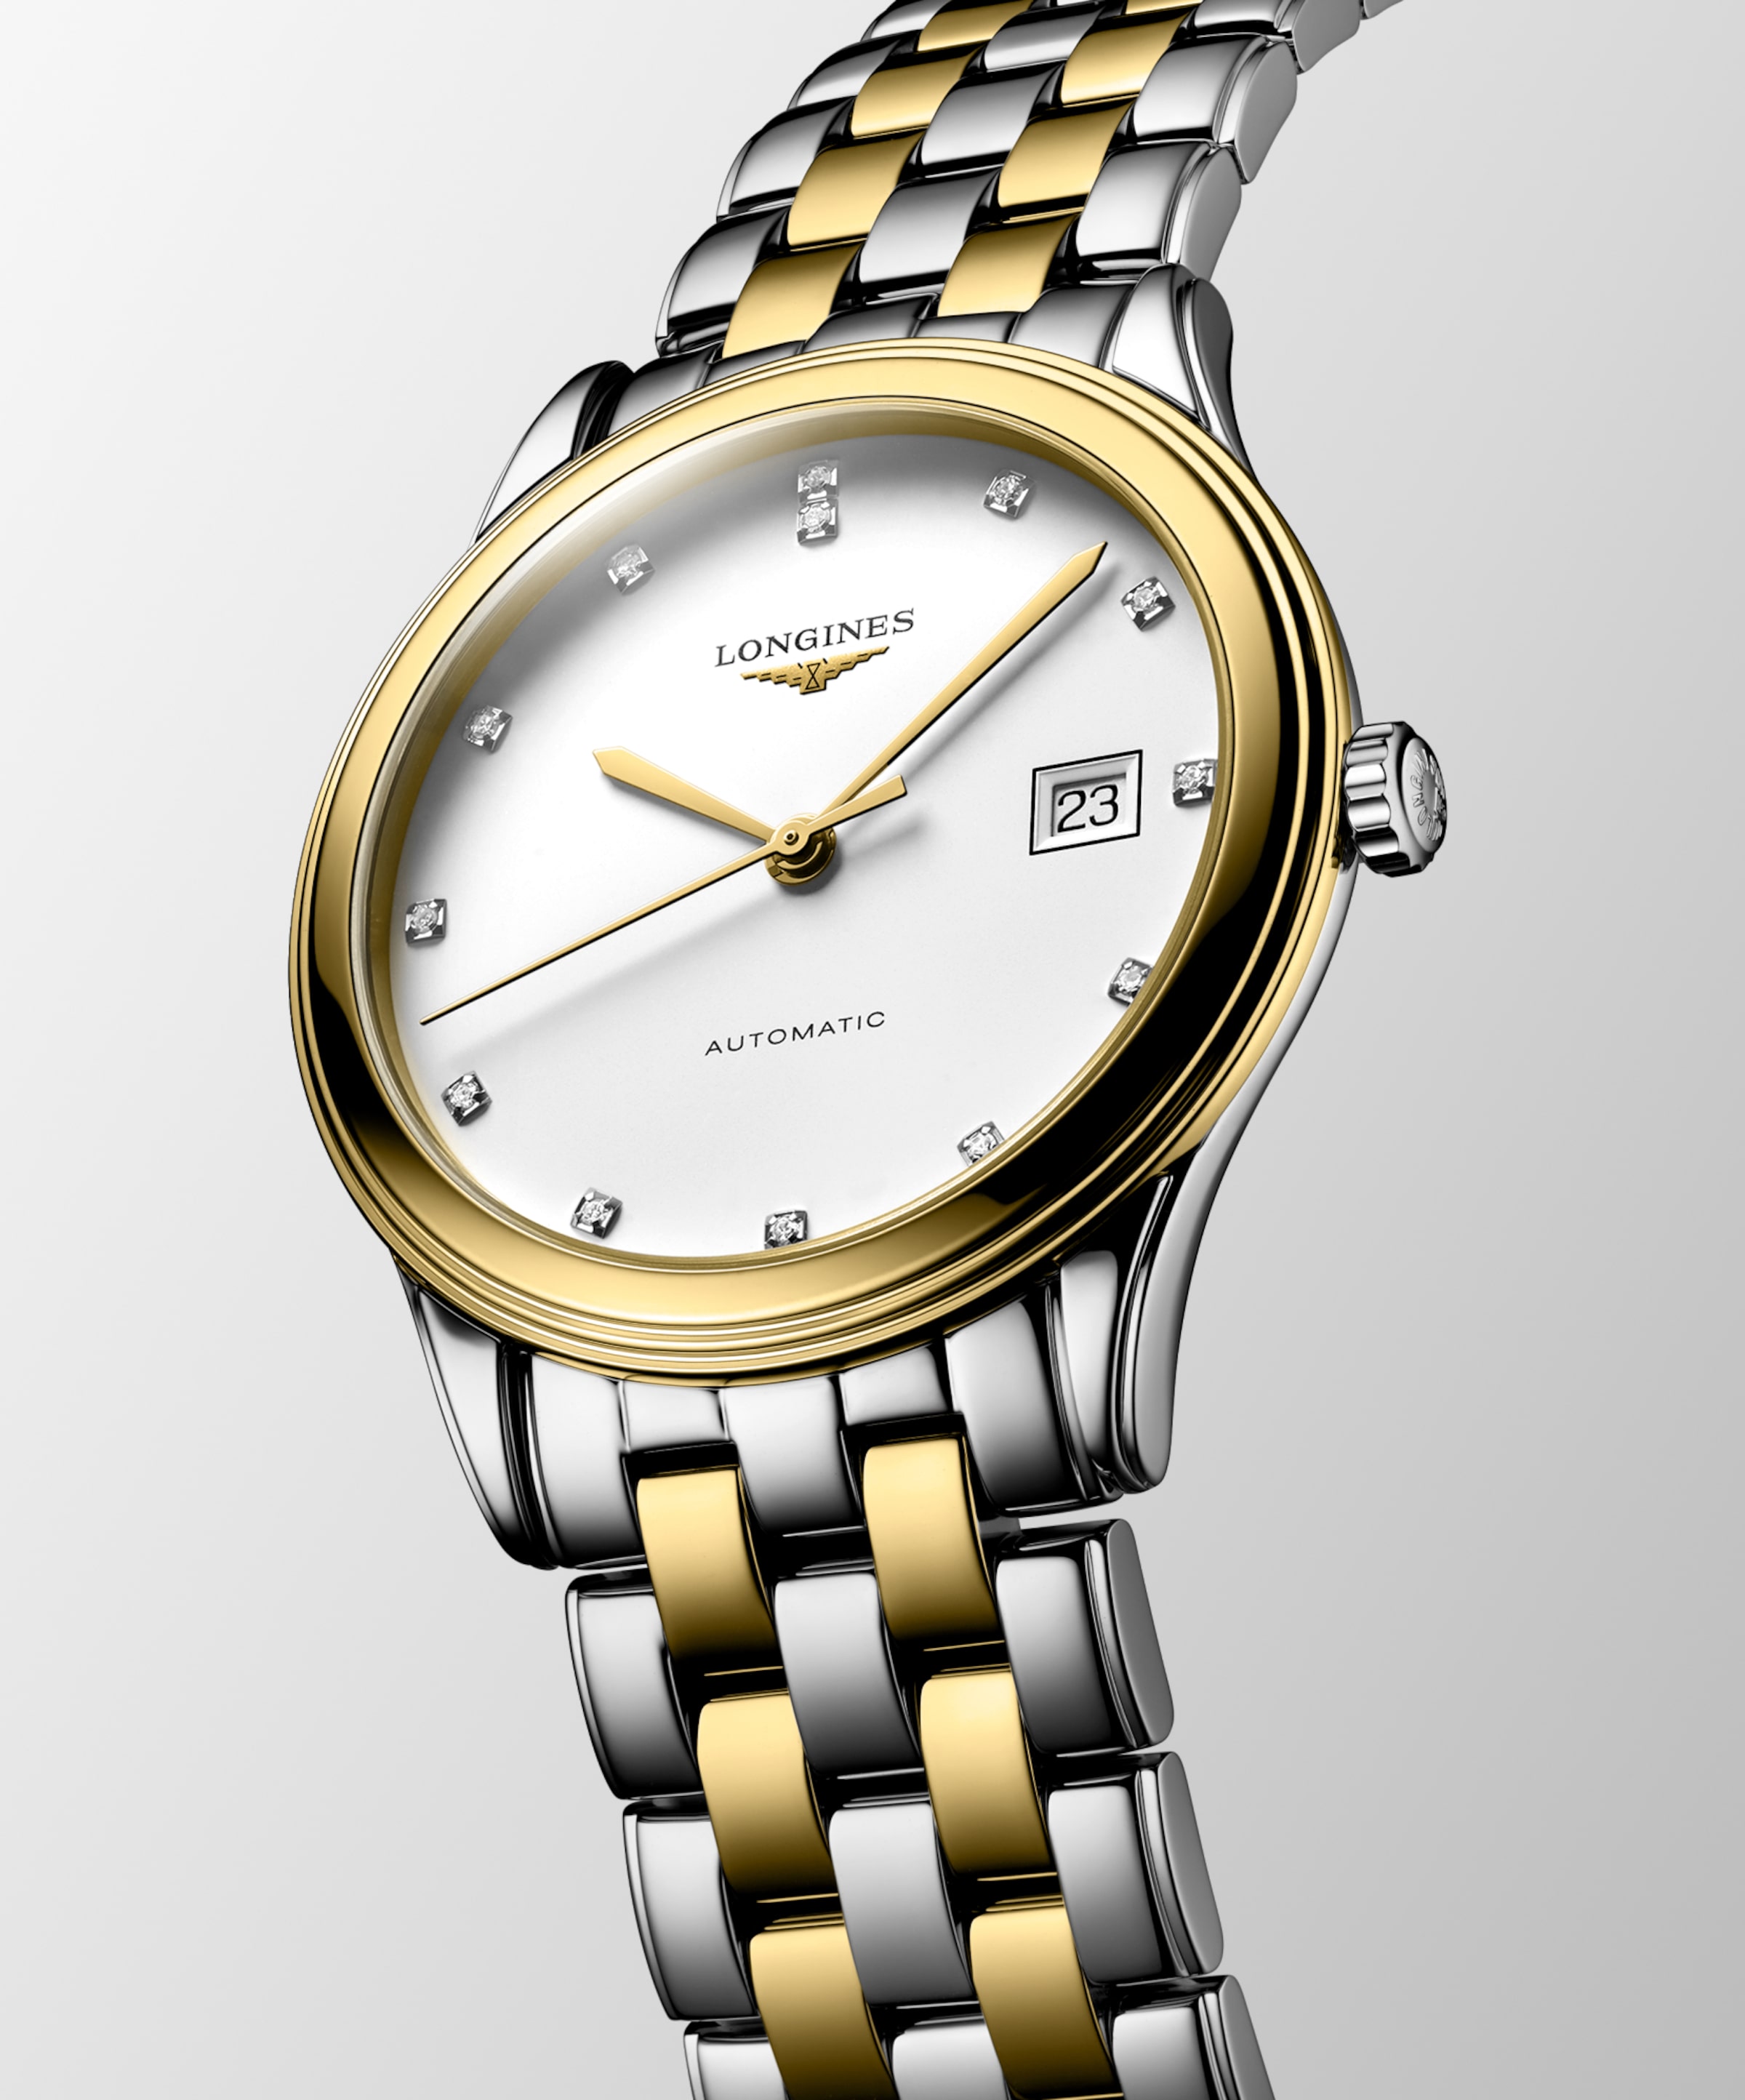 Longines FLAGSHIP Automatic Stainless steel and yellow PVD coating Watch - L4.974.3.27.7